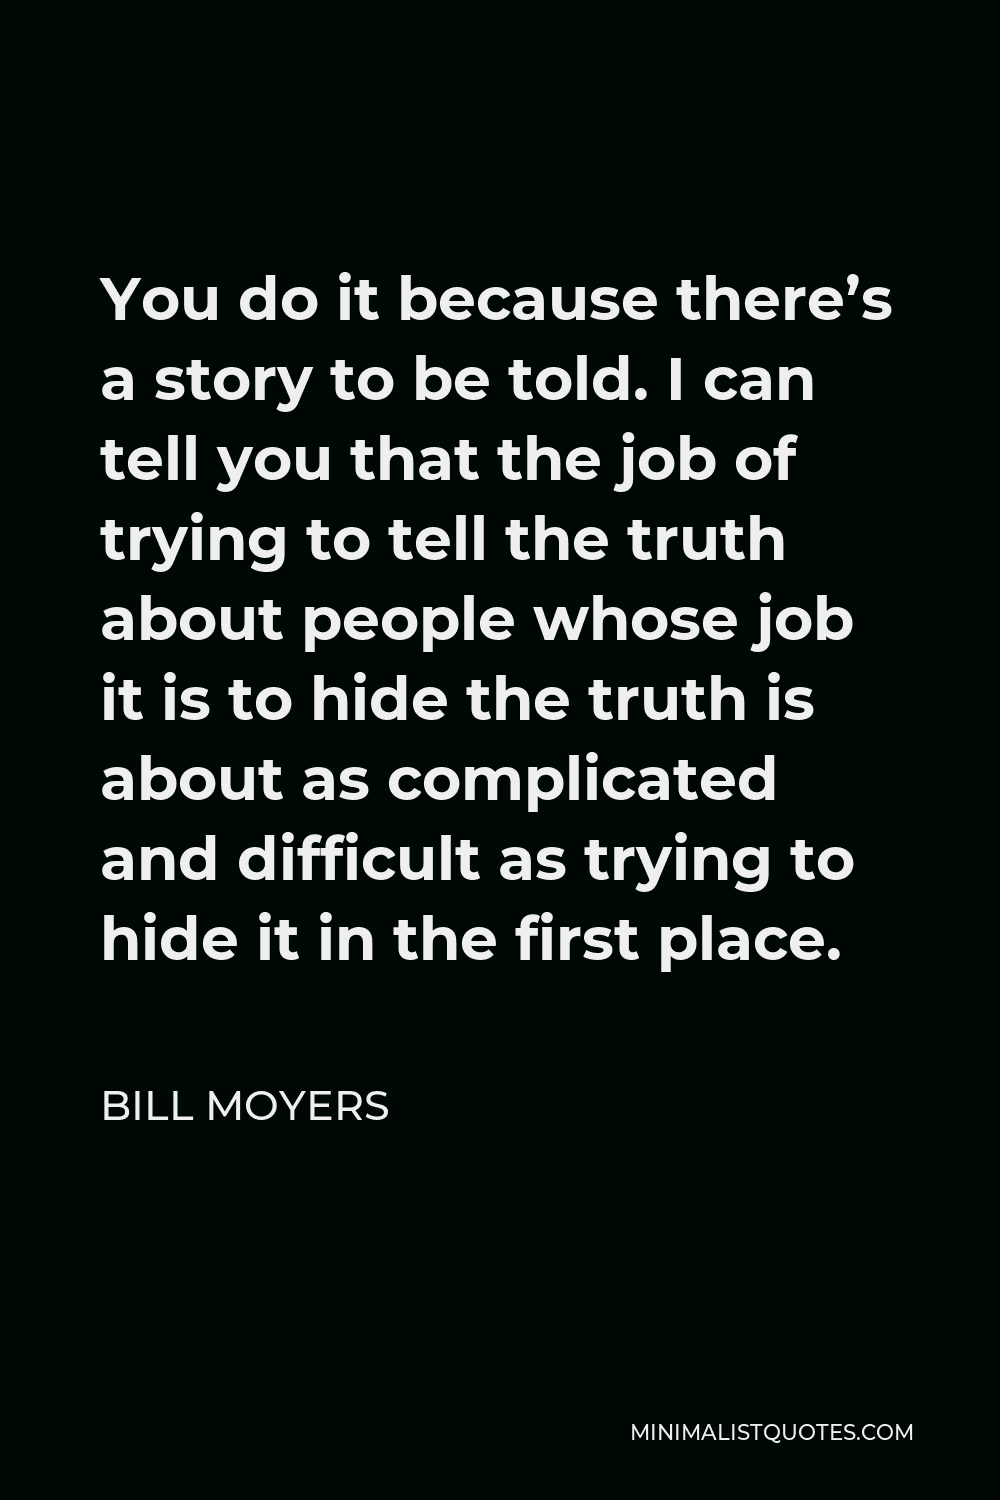 Bill Moyers Quote - You do it because there’s a story to be told. I can tell you that the job of trying to tell the truth about people whose job it is to hide the truth is about as complicated and difficult as trying to hide it in the first place.